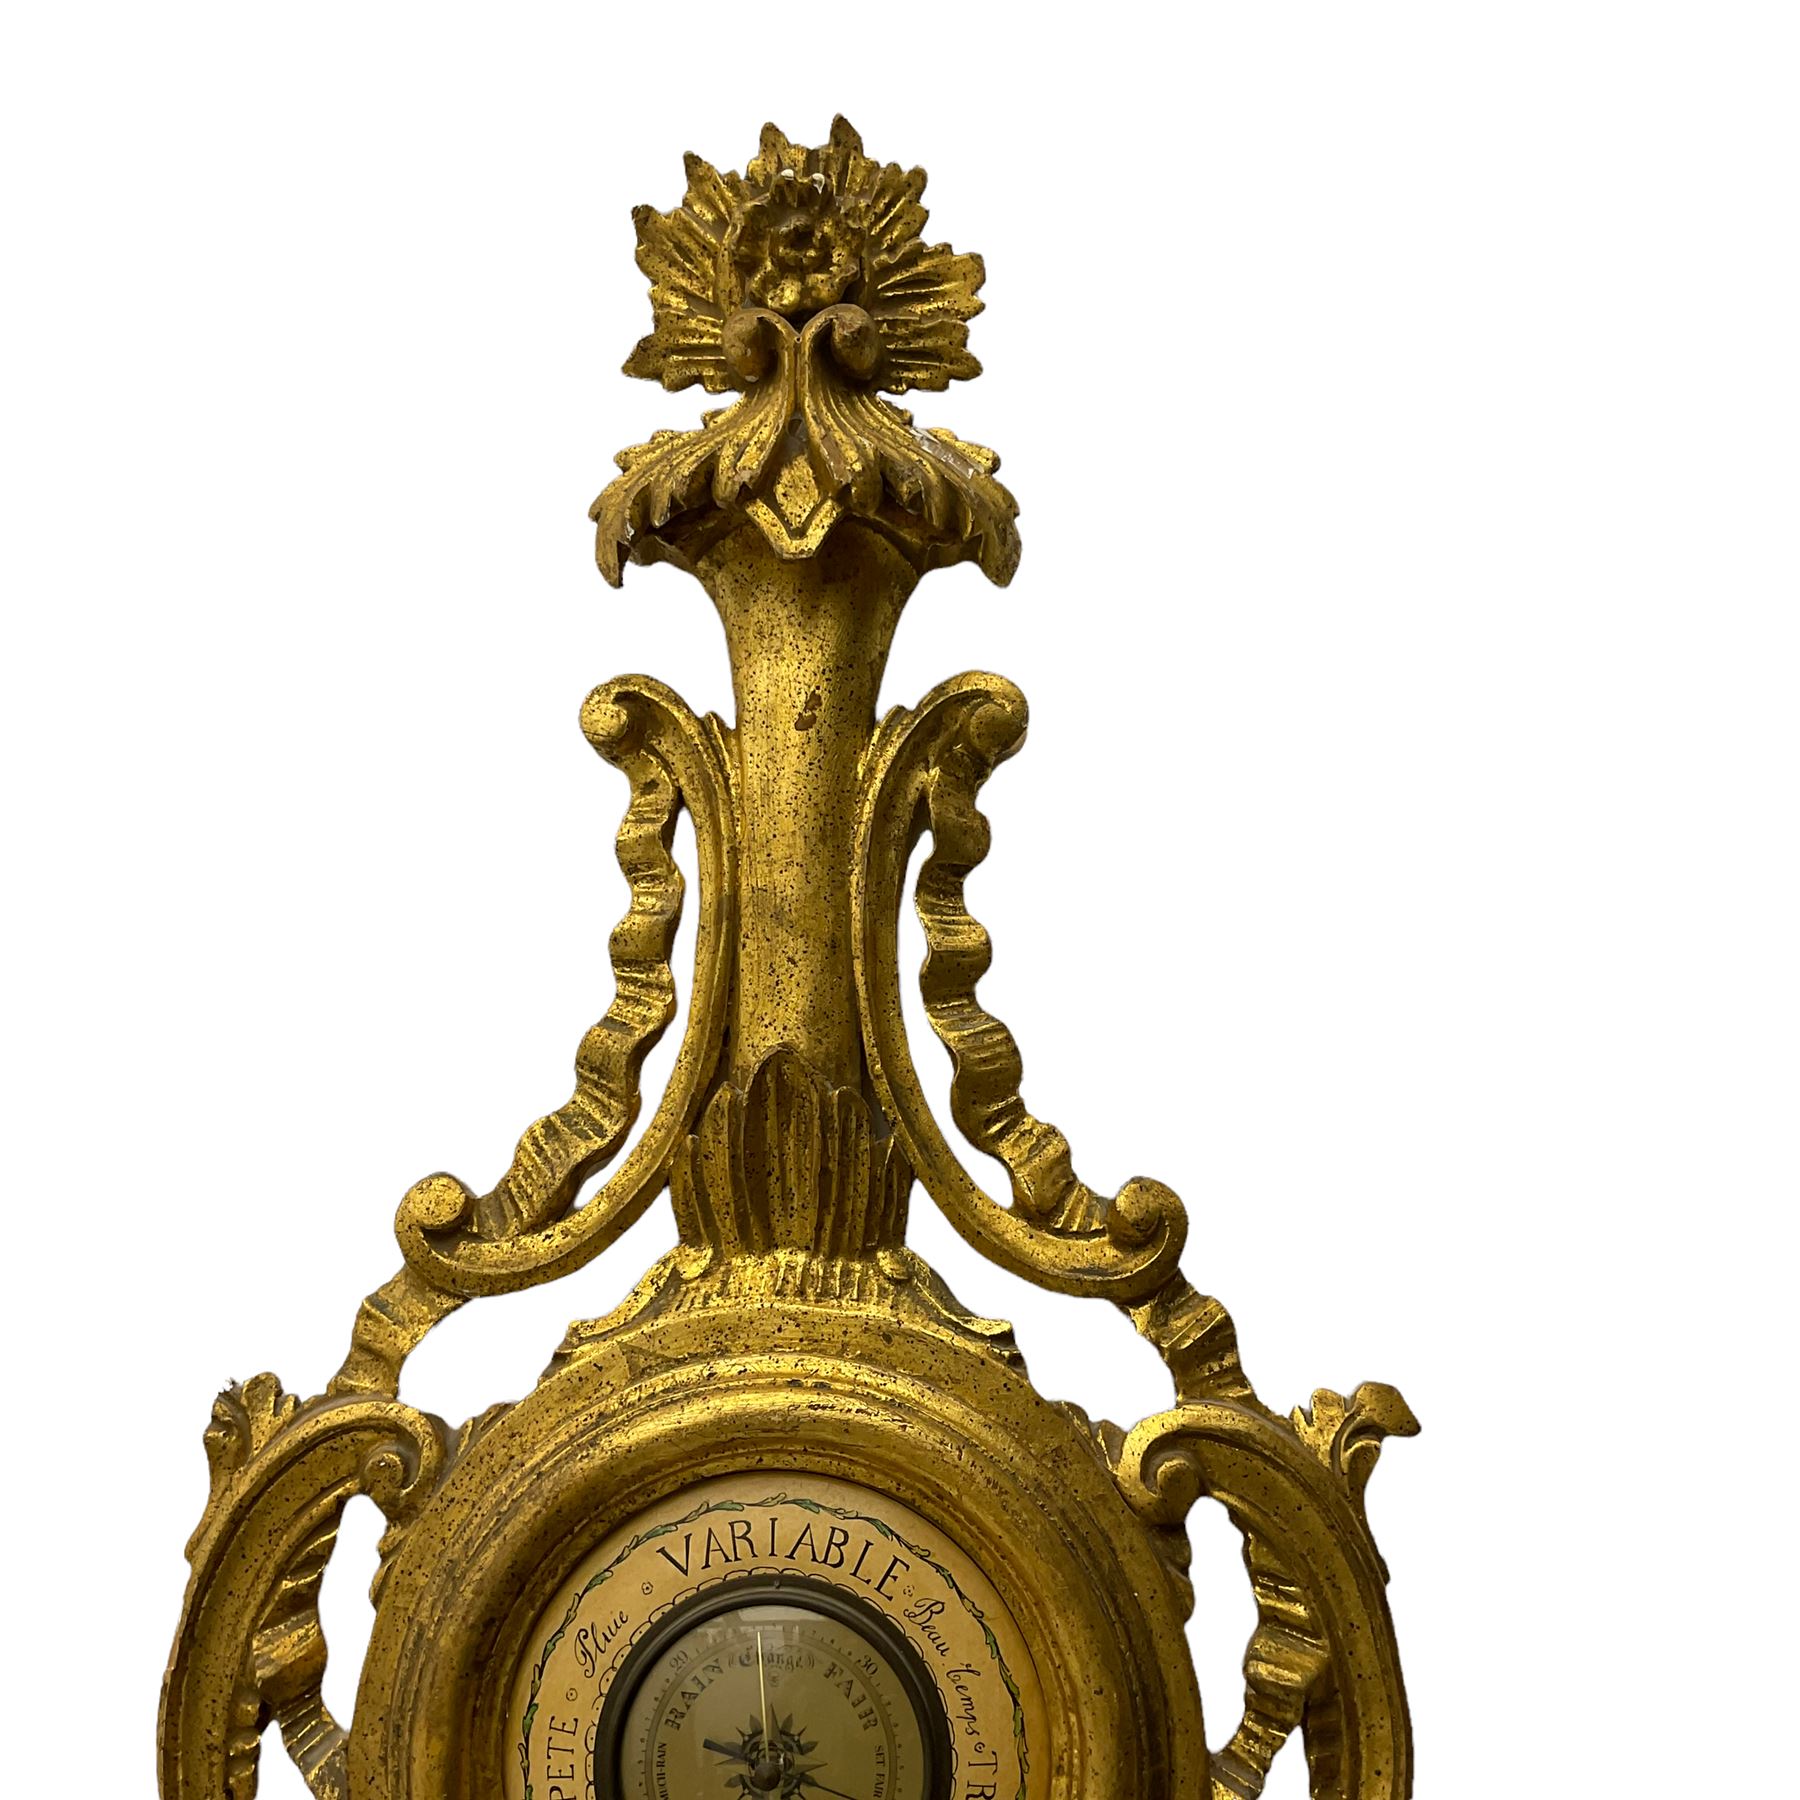 A 20th century Italian barometer in a carved gilt wood case in the late 18th century rococo style - Image 4 of 4